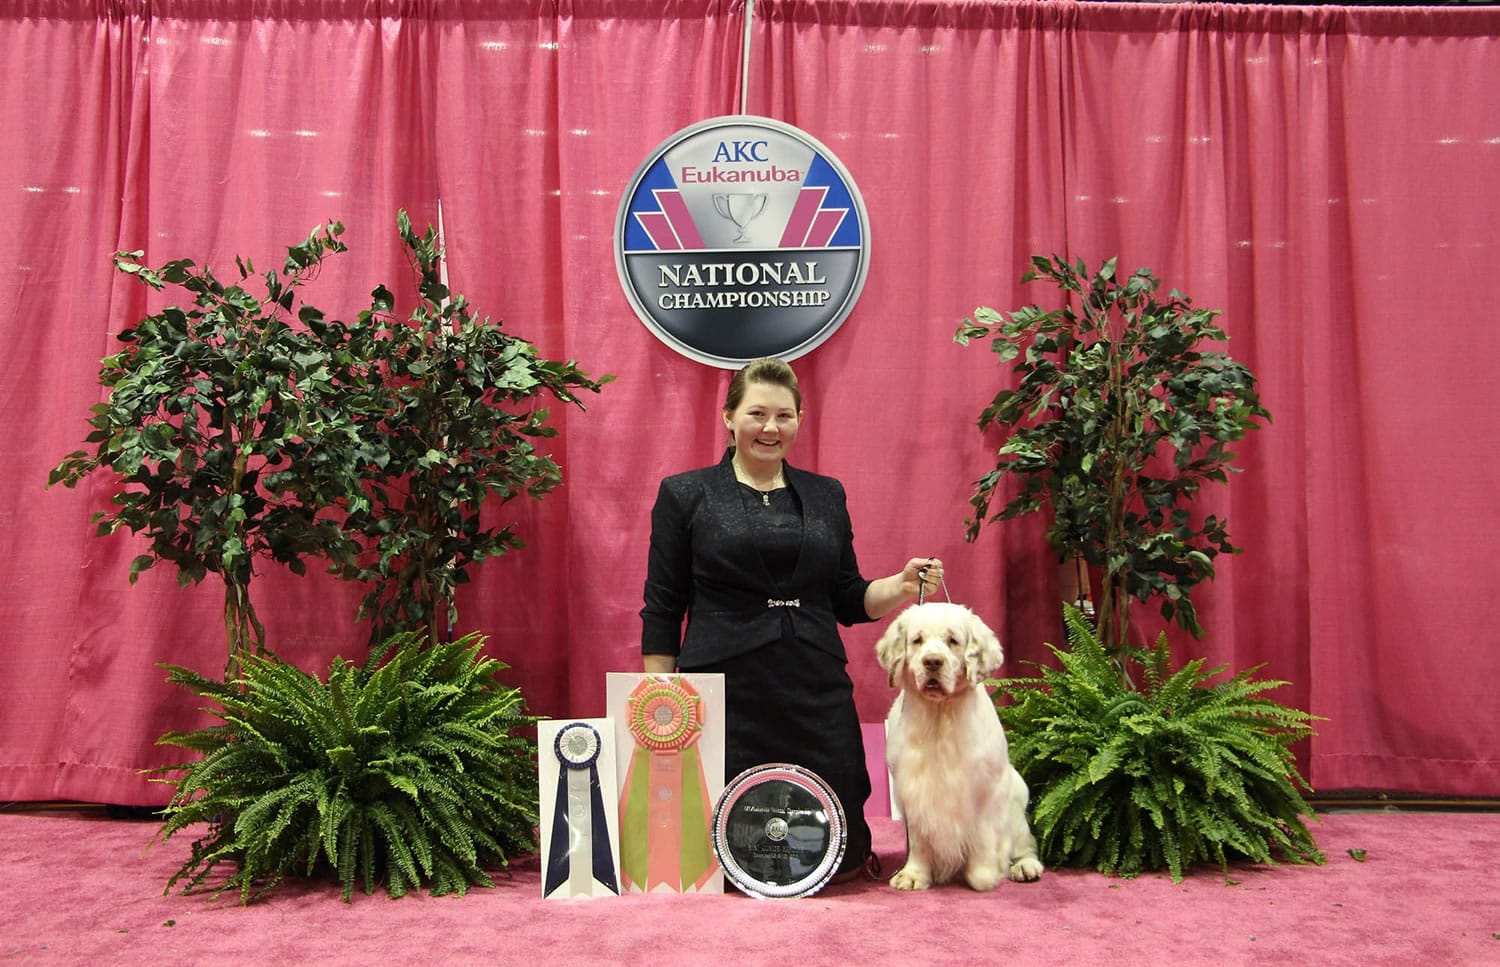 Raina Moss and her dog Dirk, a clumber spaniel, won the 2015 Eukanuba National Junior Showmanship Championship in Orlando, Fla., and will travel to England to represent the United States in international competition.